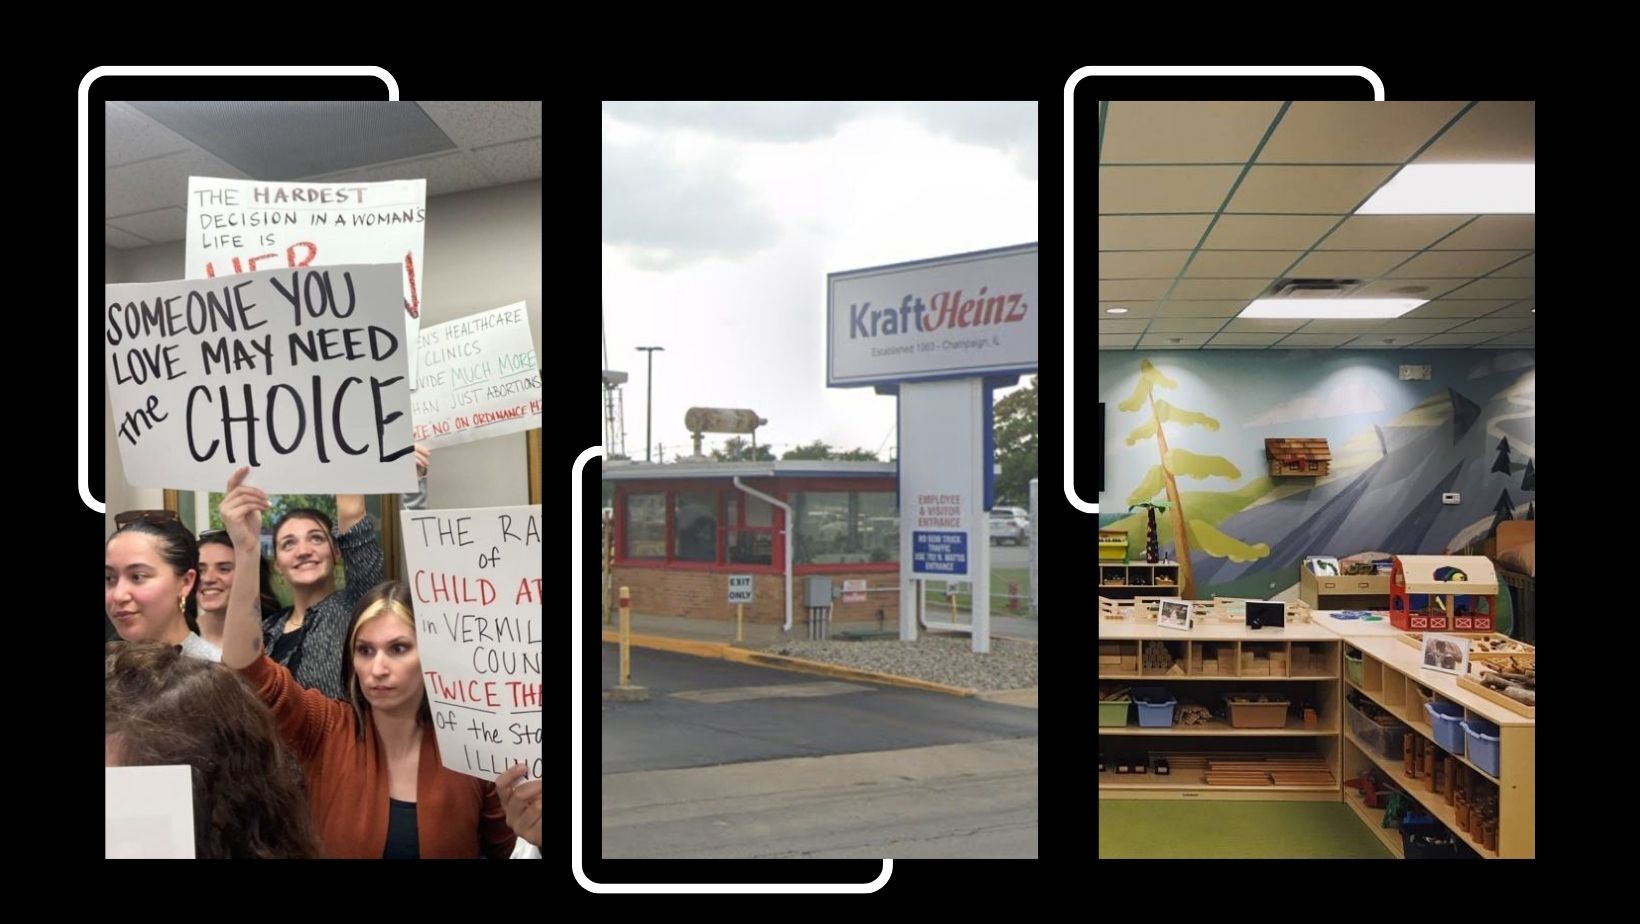 Three vertical photos on a black background: left image is a protest with women holding signs about abortion access; middle is an image of the entrance to the Kraft-Heinz factory, with a white sign that reads "Kraft Heinz"; right image is of a daycare center, with a mural of a mountain and forest on the wall, and children's toys and cubbies in the space.